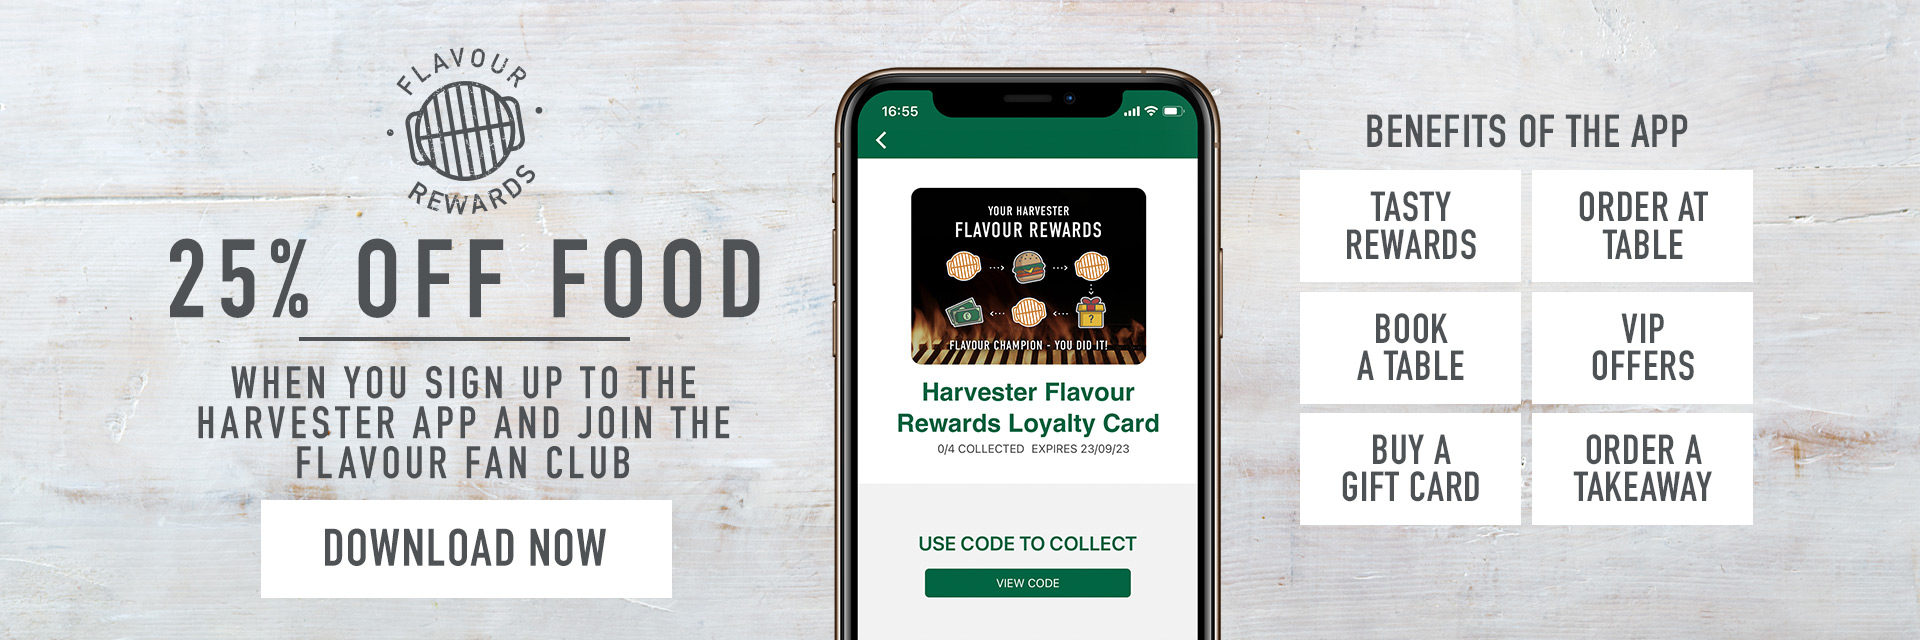 Harvester - Avail Flat 25% OFF